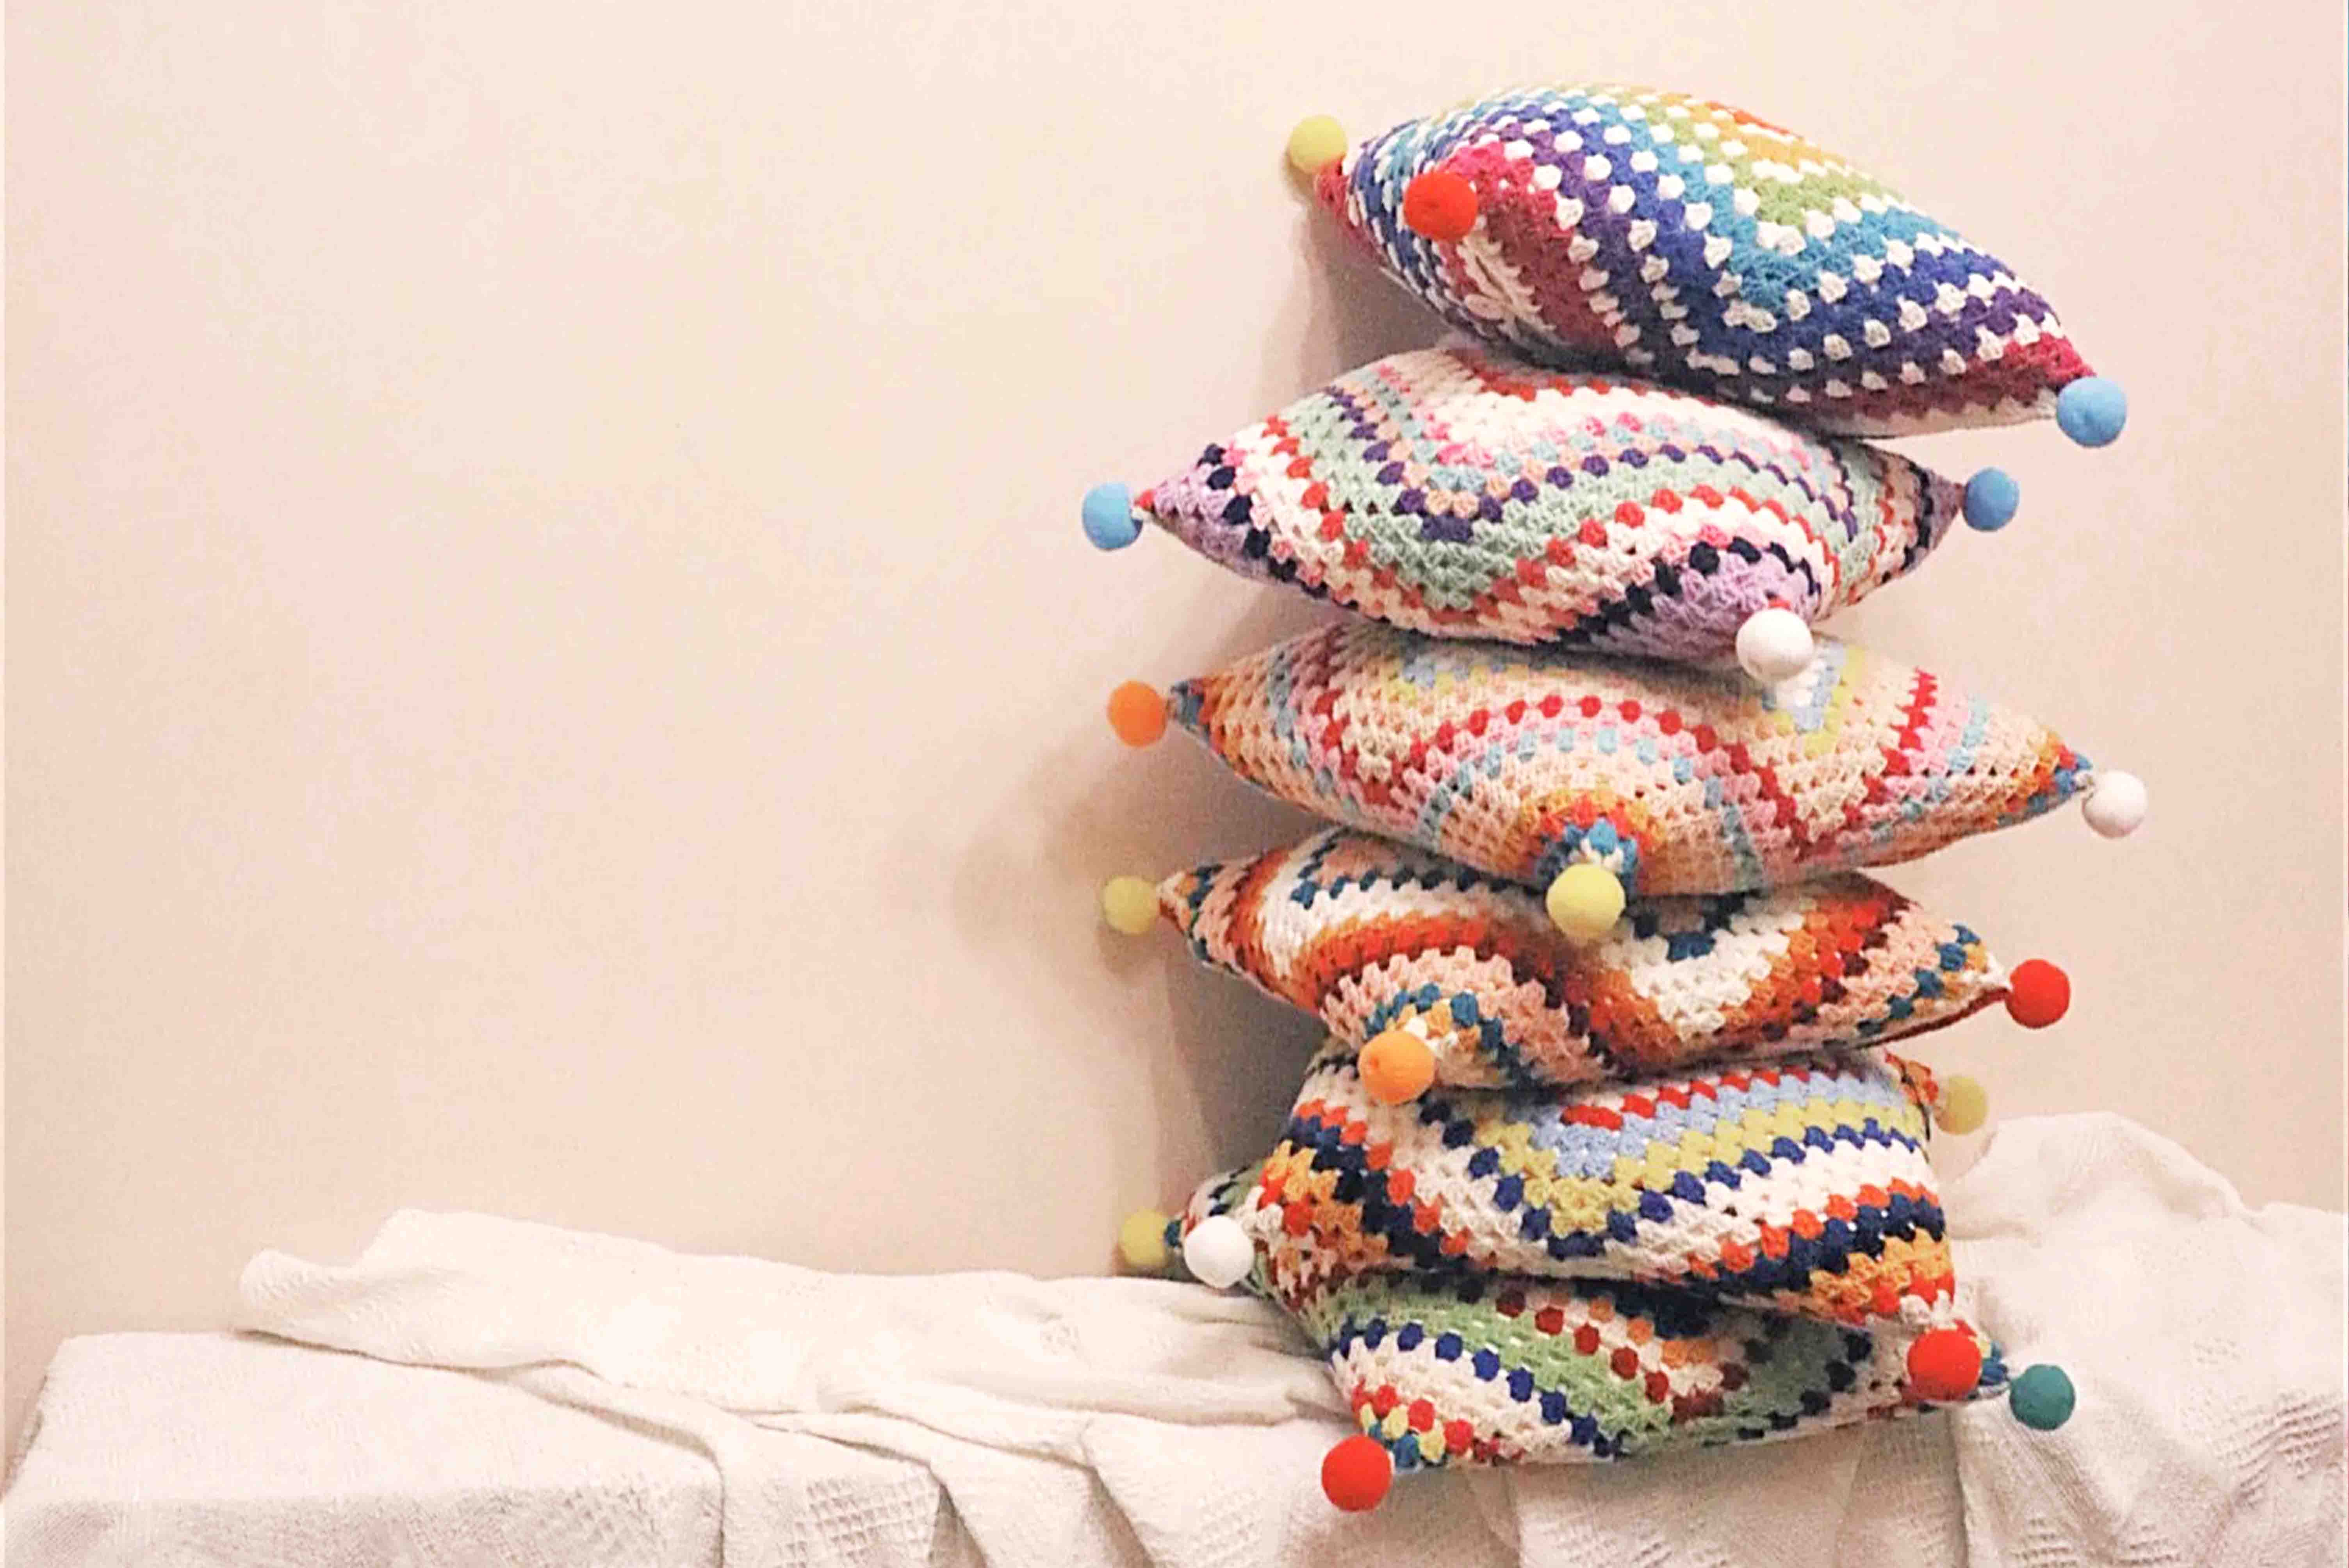 Handmade-Spinus offers you hand-crocheted cushions and pillows in contrasting colors.